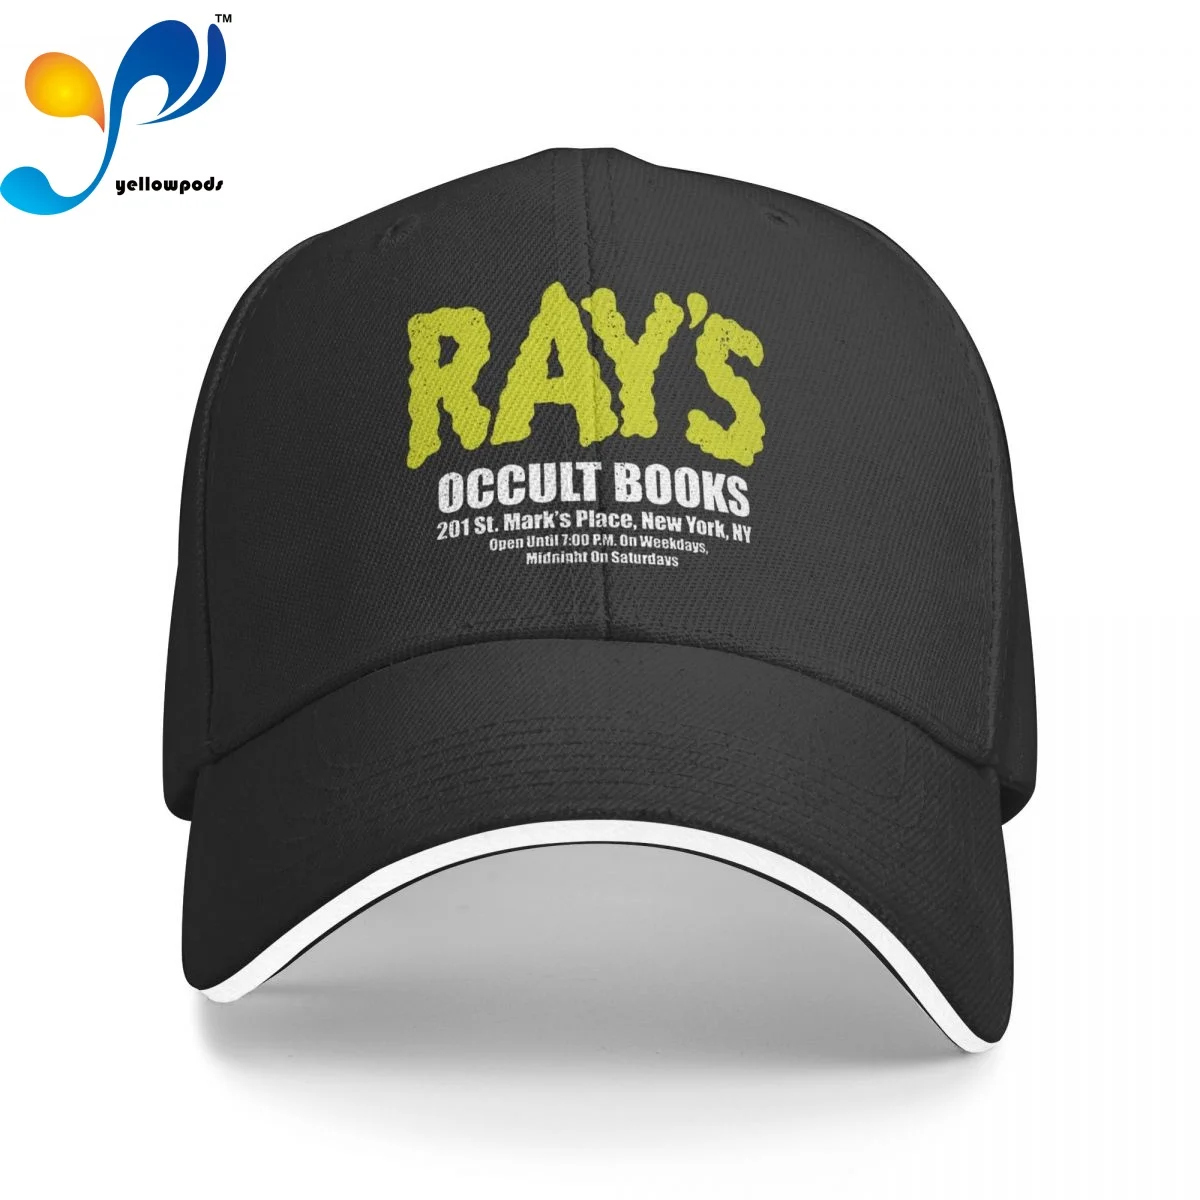 

Baseball Cap Men Ray's Occult Books Fashion Caps Hats for Logo Asquette Homme Dad Hat for Men Trucker Cap